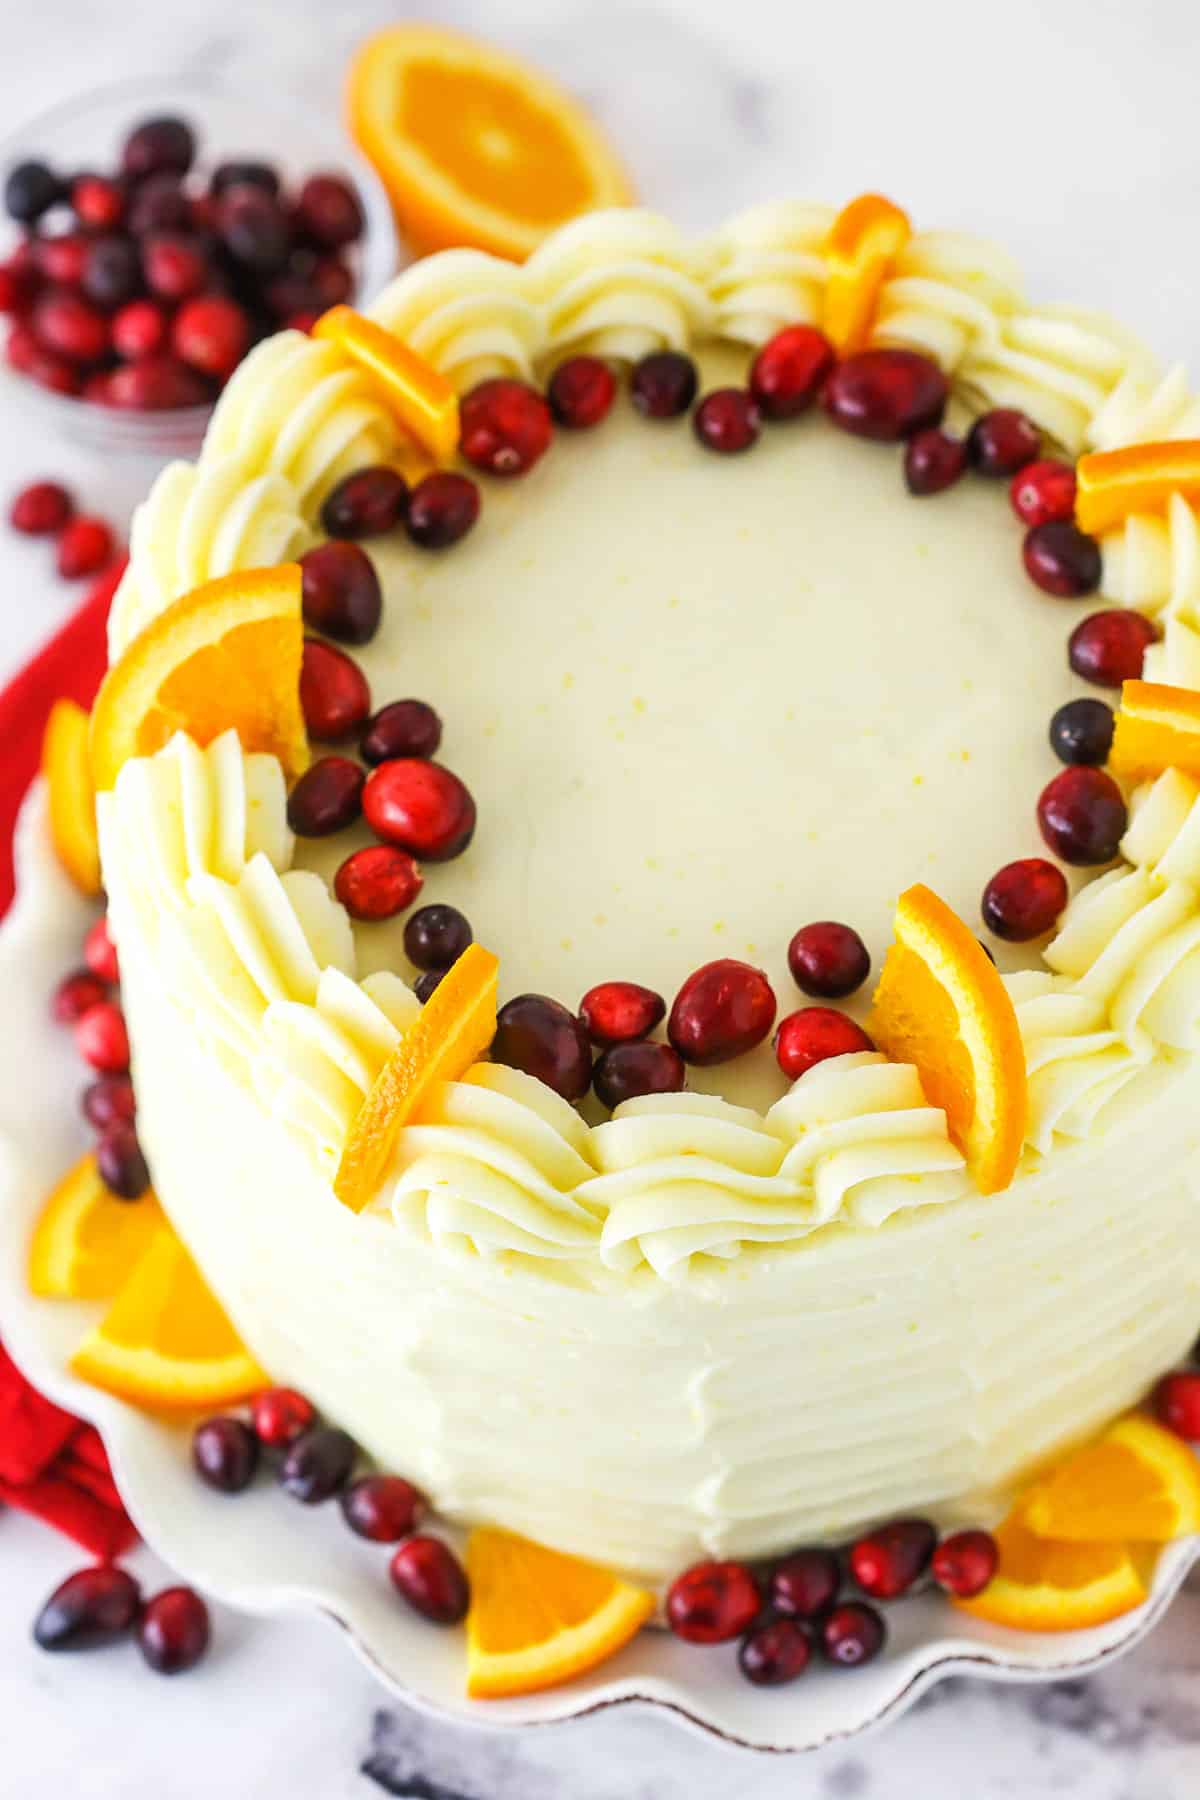 Overhead view of a Cranberry Orange Layer Cake topped with cranberries, orange slices and white swirls.